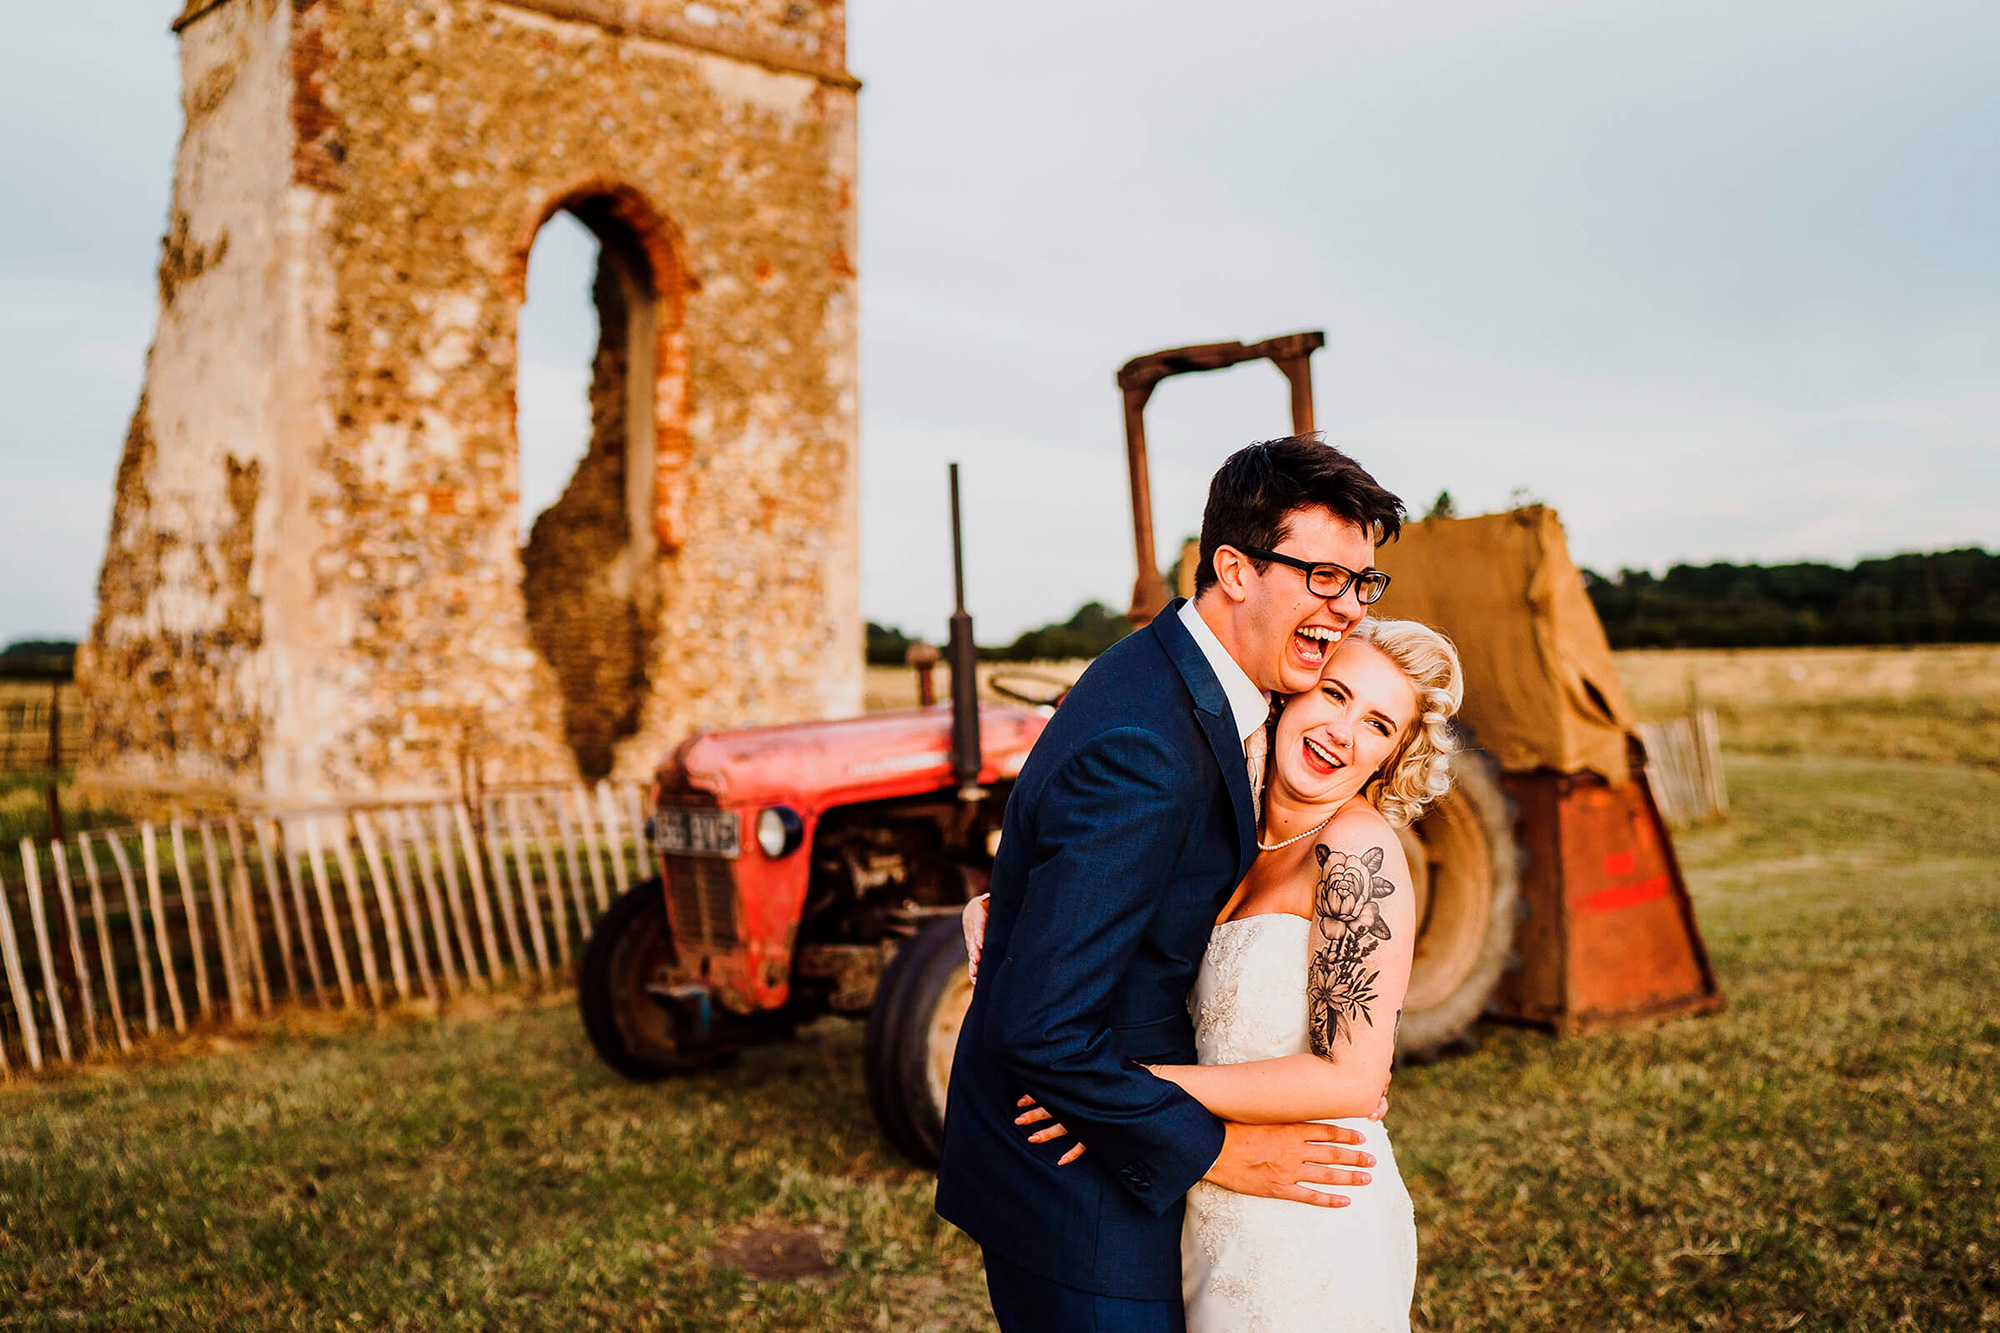 Lucy Simon Rustic Quirky Wedding Rob Dodsworth Photography 041